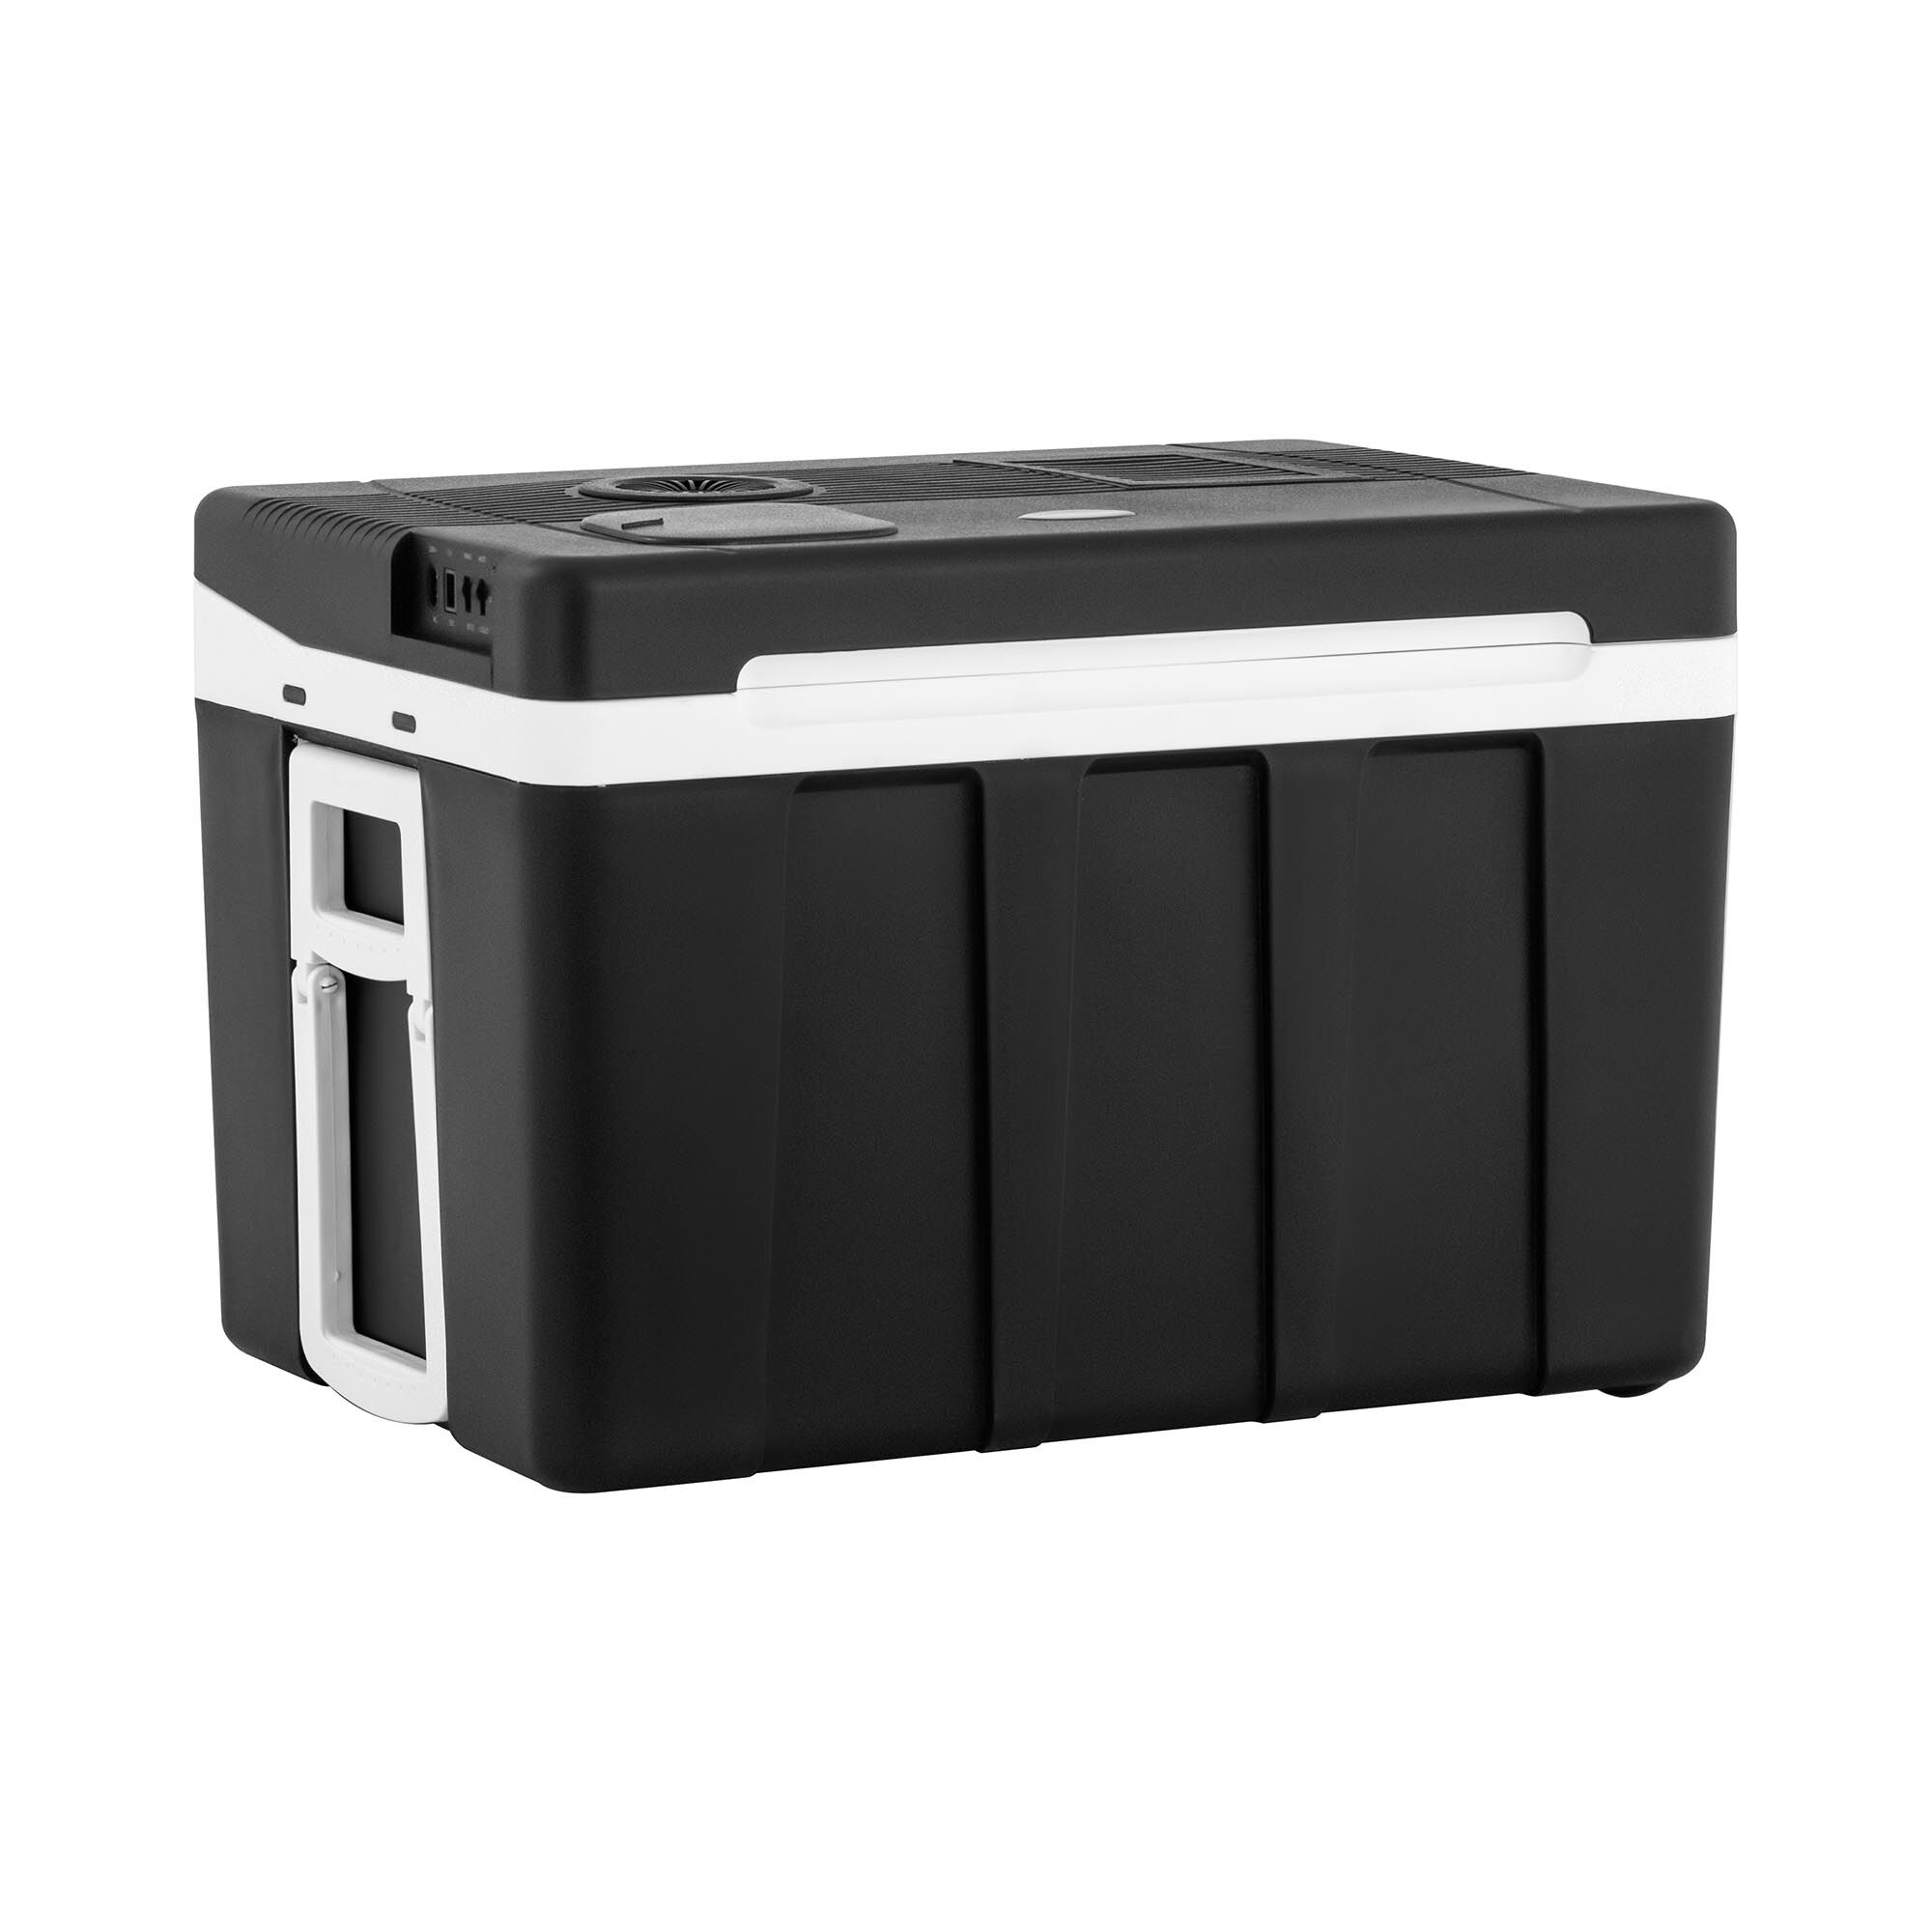 Uniprodo Electric Cooler Box - 2-in-1 device with warming function - 50 L UNI_COOL_50